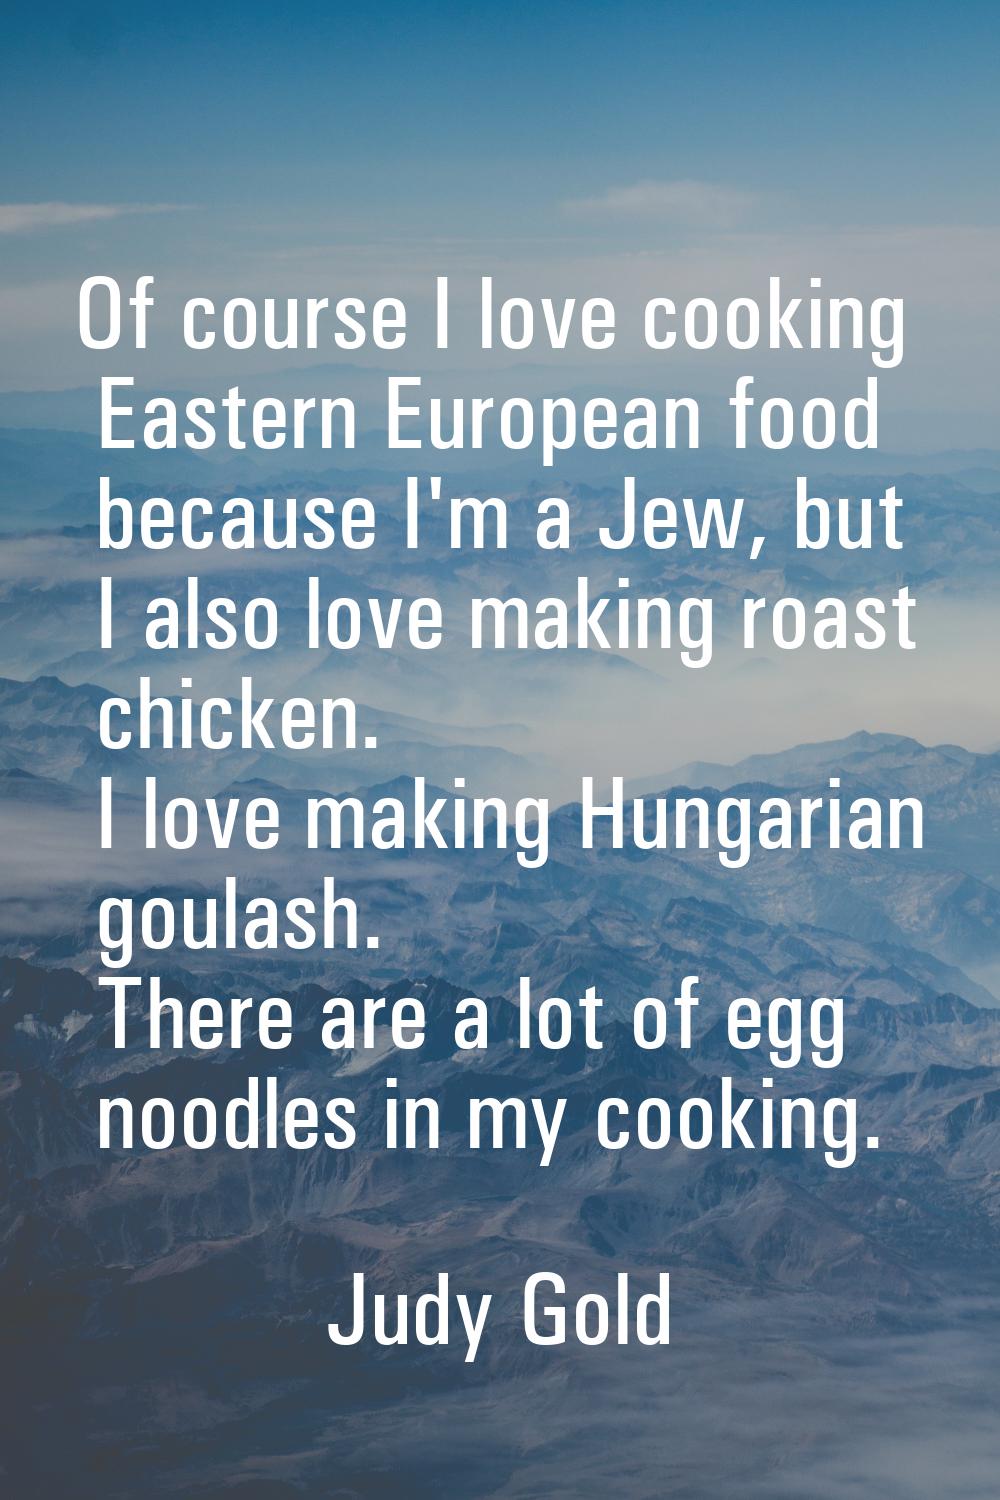 Of course I love cooking Eastern European food because I'm a Jew, but I also love making roast chic